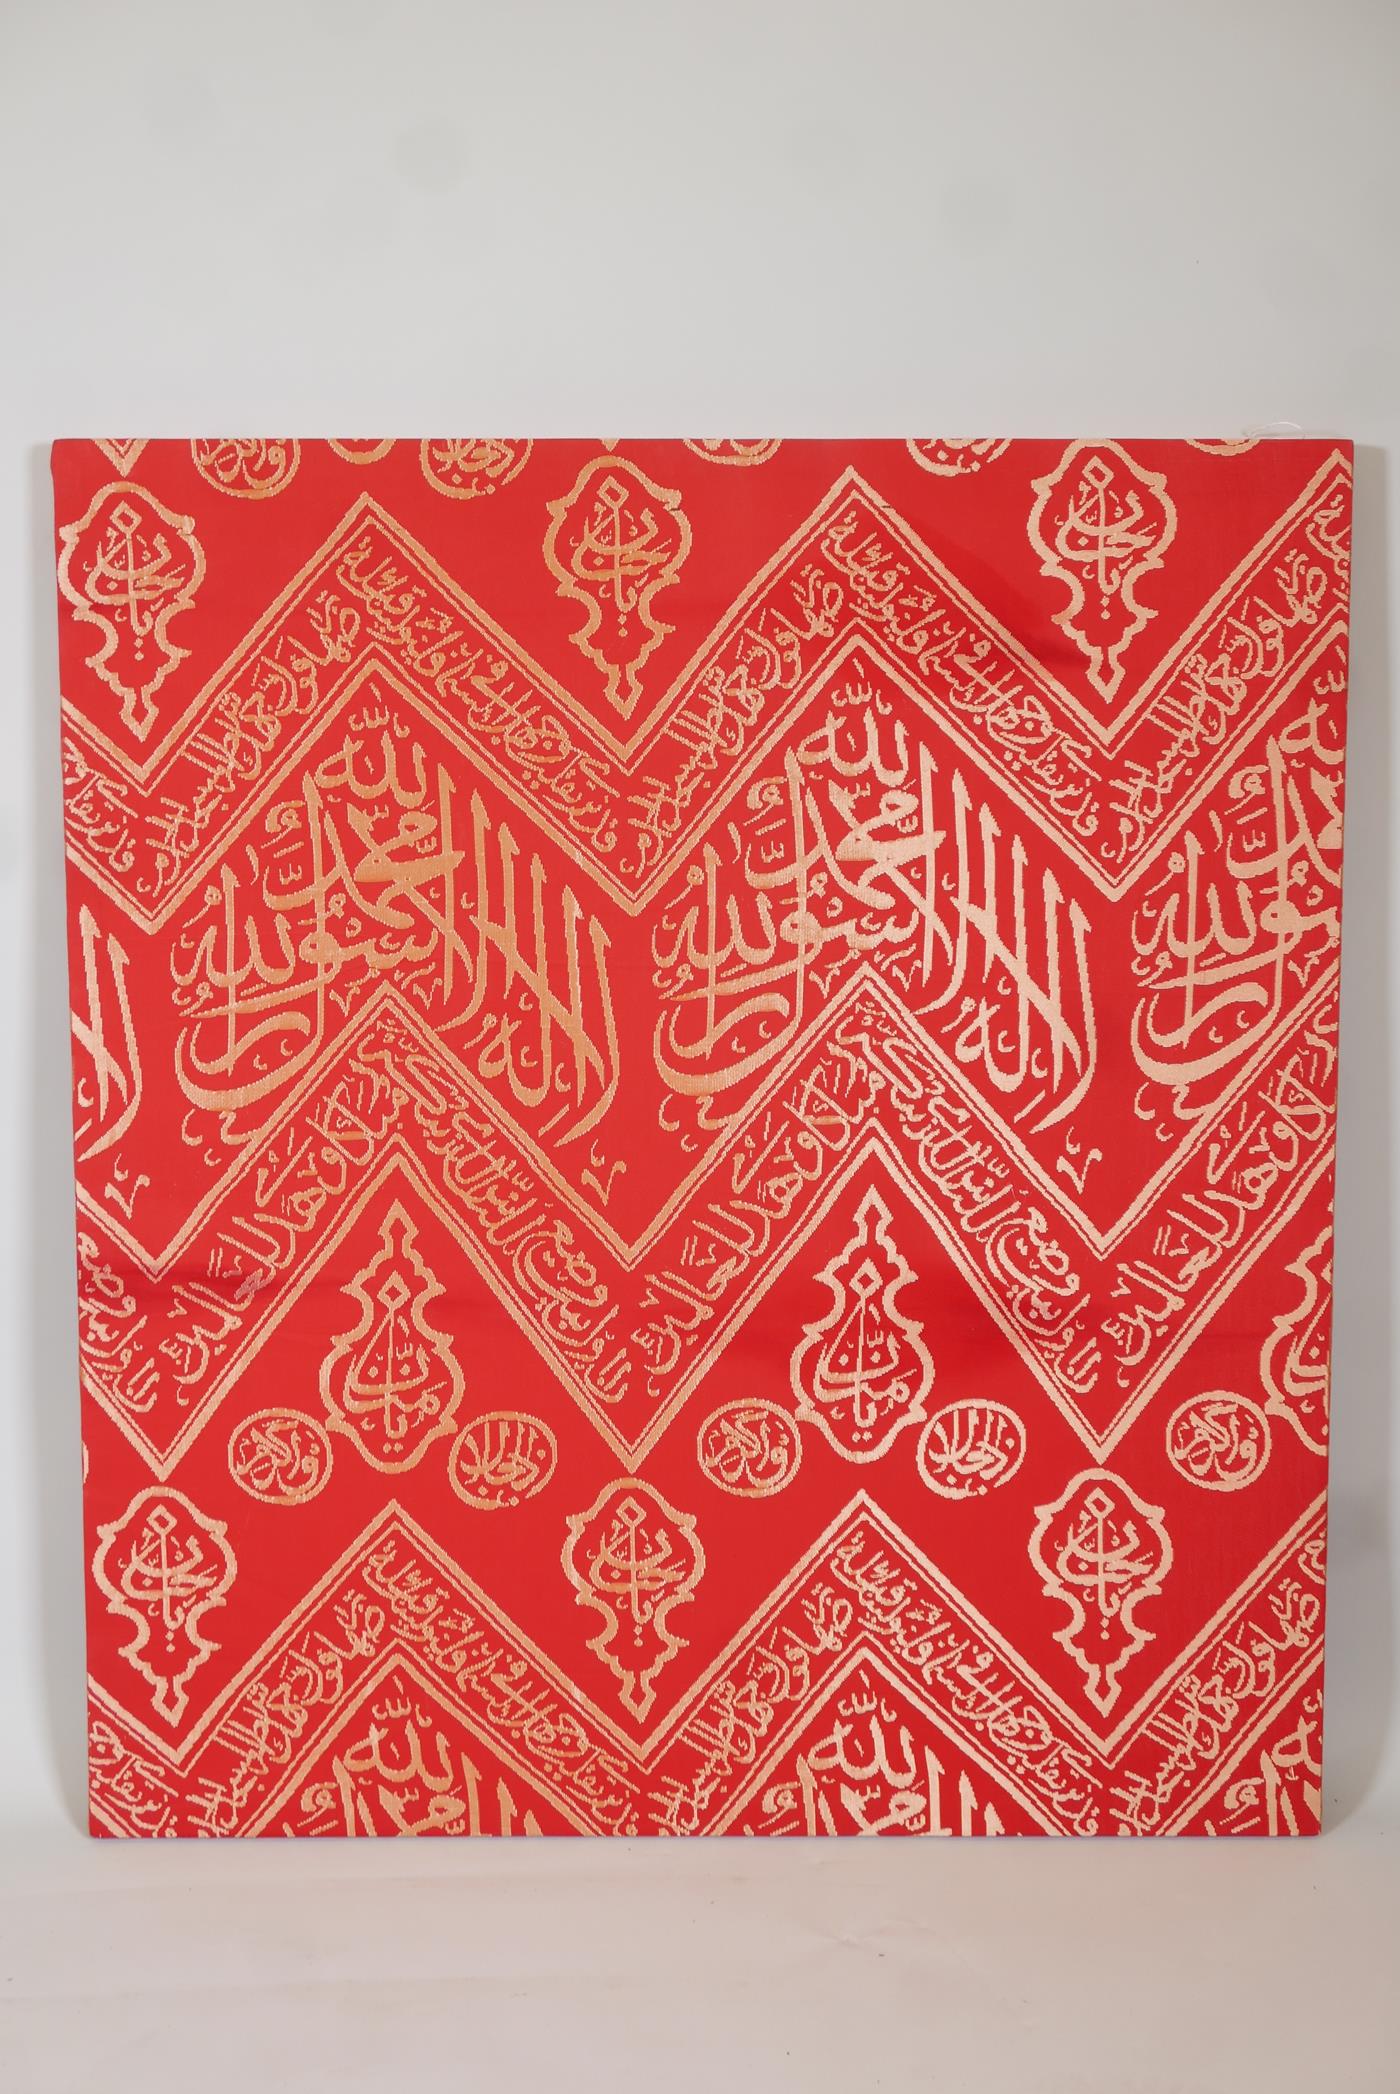 An Islamic calligraphic textile wall hanging, 37½" x 42"